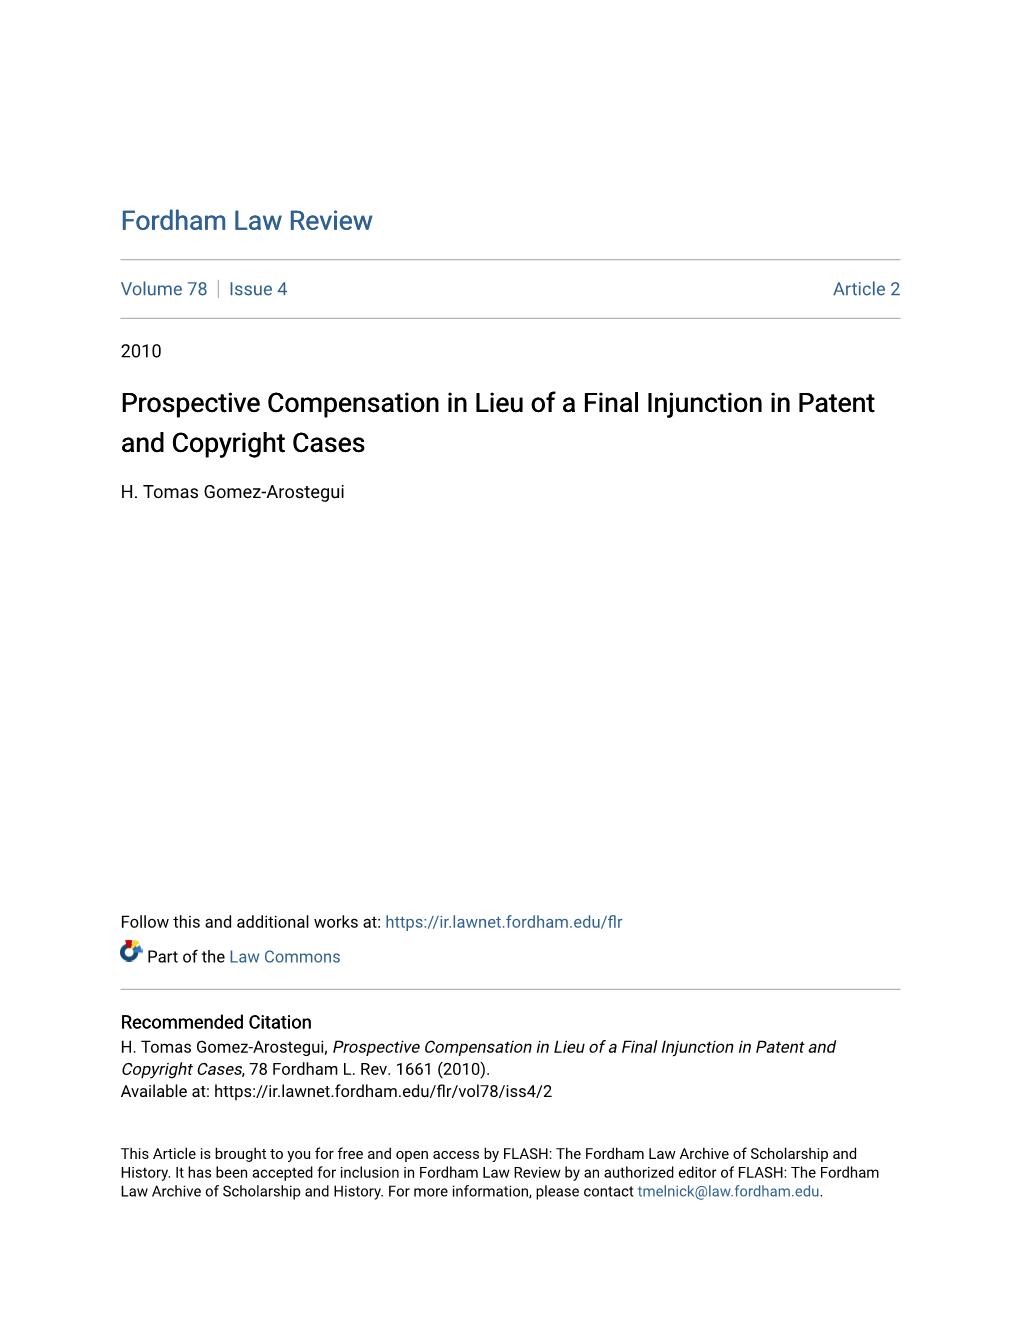 Prospective Compensation in Lieu of a Final Injunction in Patent and Copyright Cases